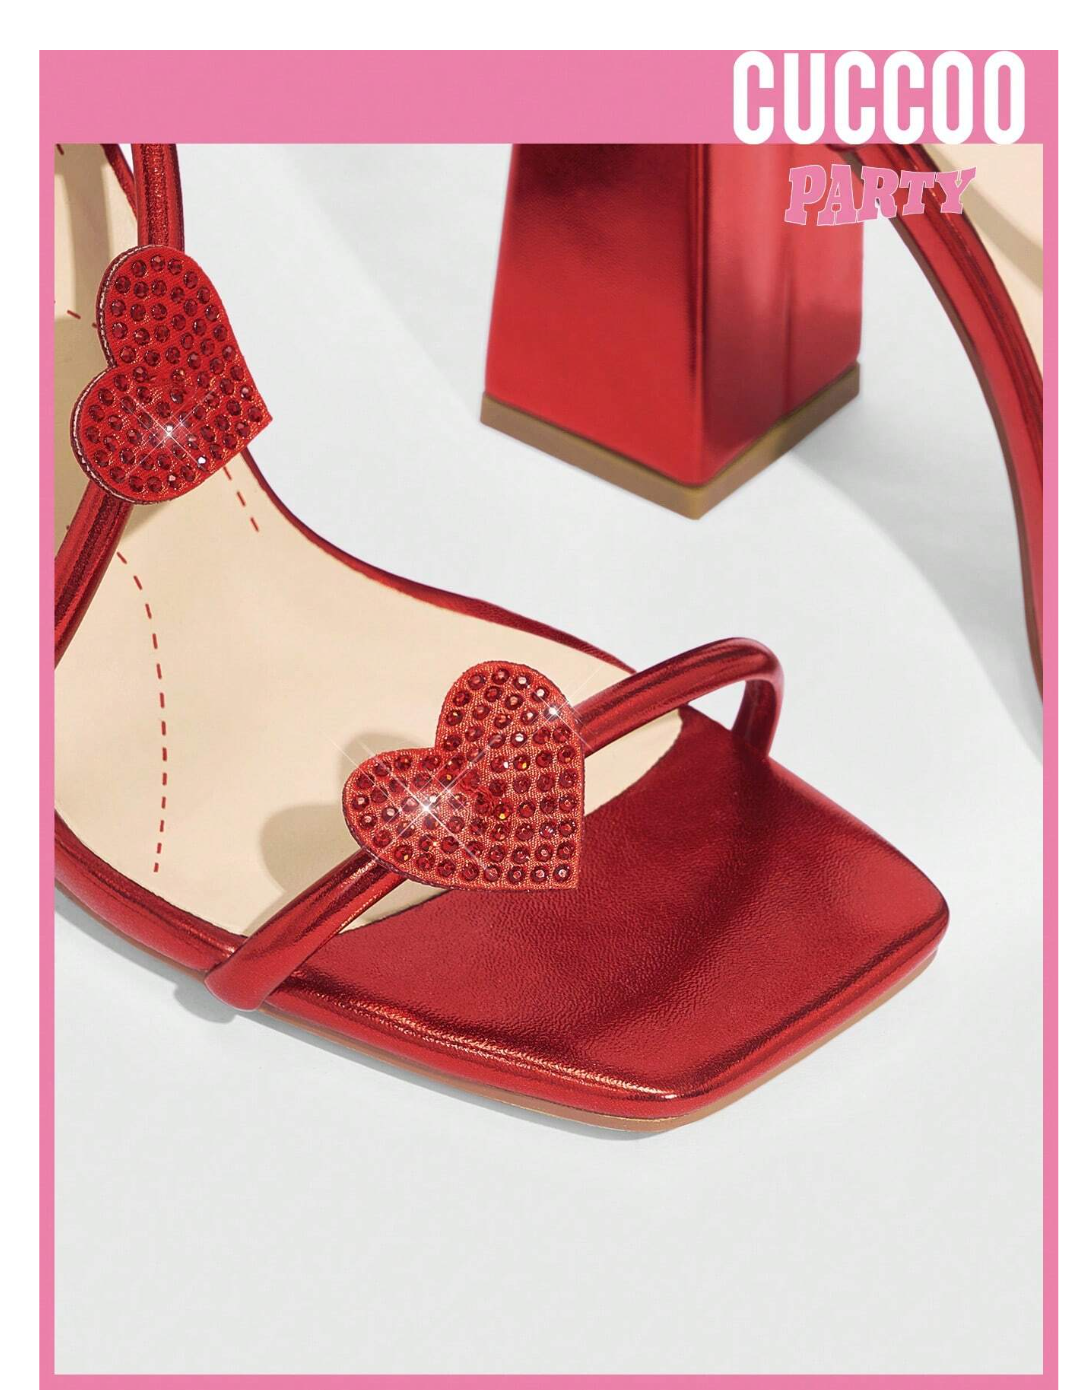 Heartbeat Chic: Cuccoo Party Collection - Valentine's Day High Heeled Heart Shaped Sandals for Women.